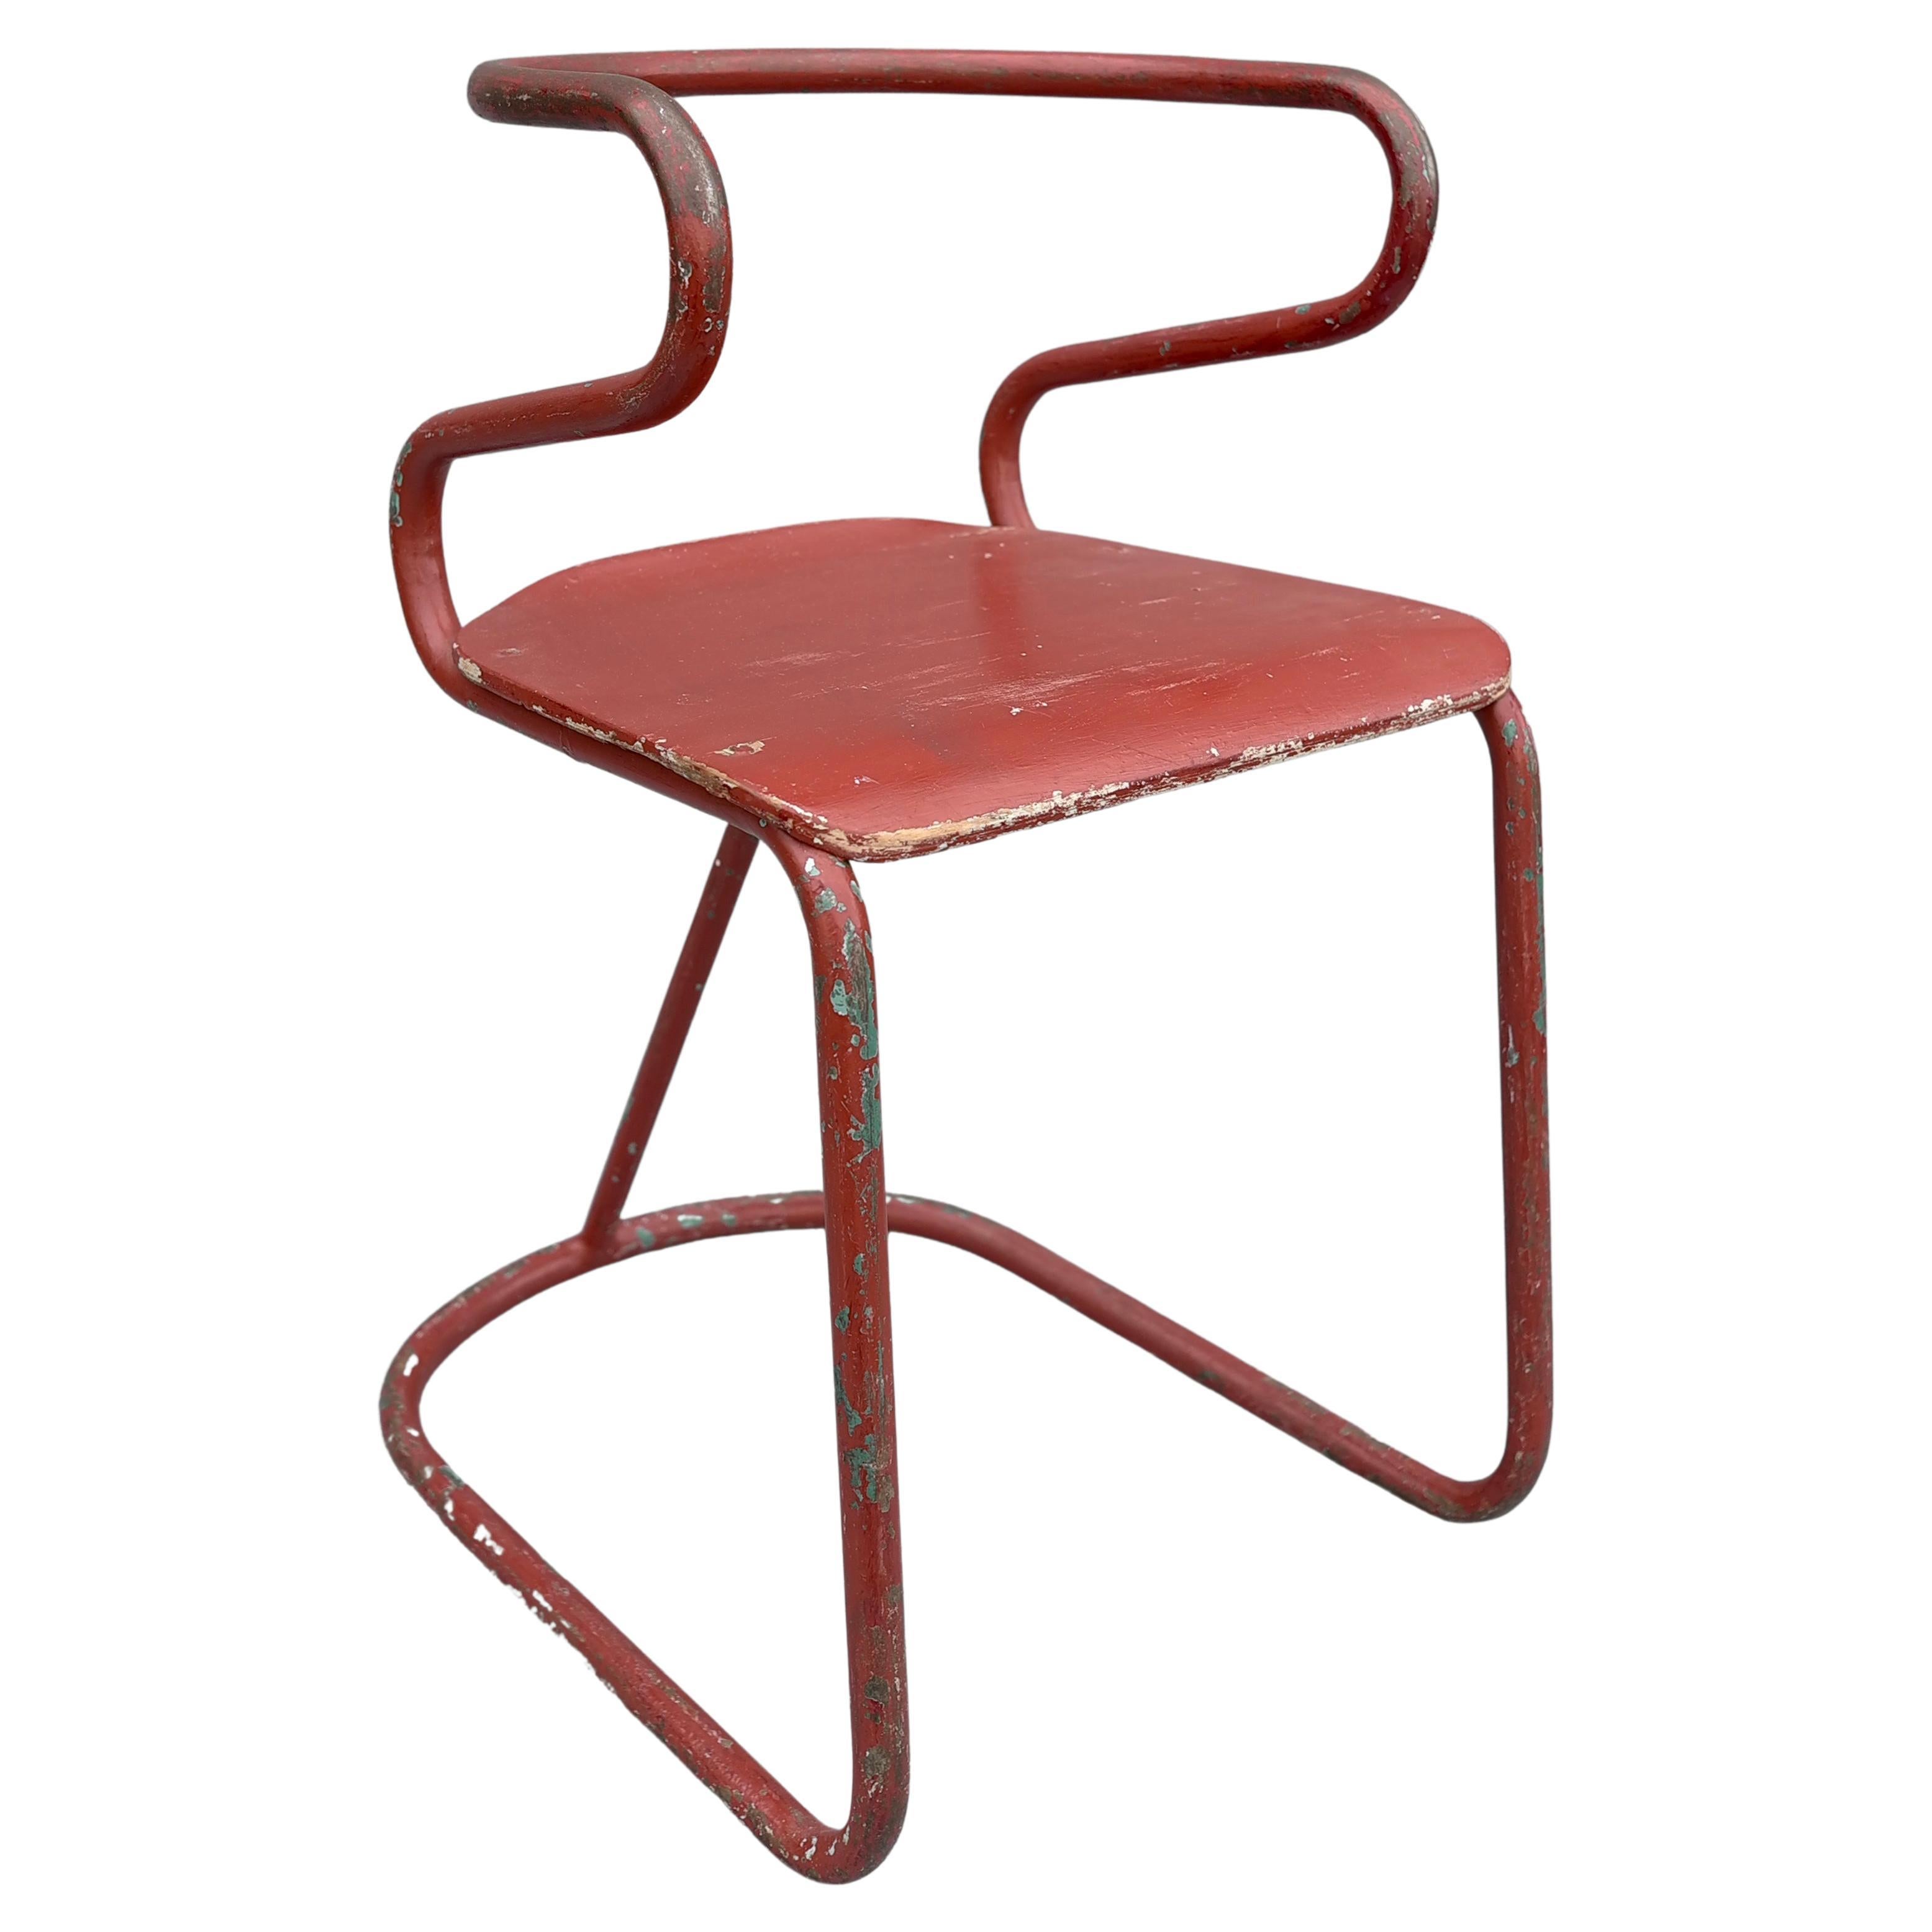 Red Sculptural Tubular Steel and Wood Mid-Century Modern Children Chair, 1950's For Sale